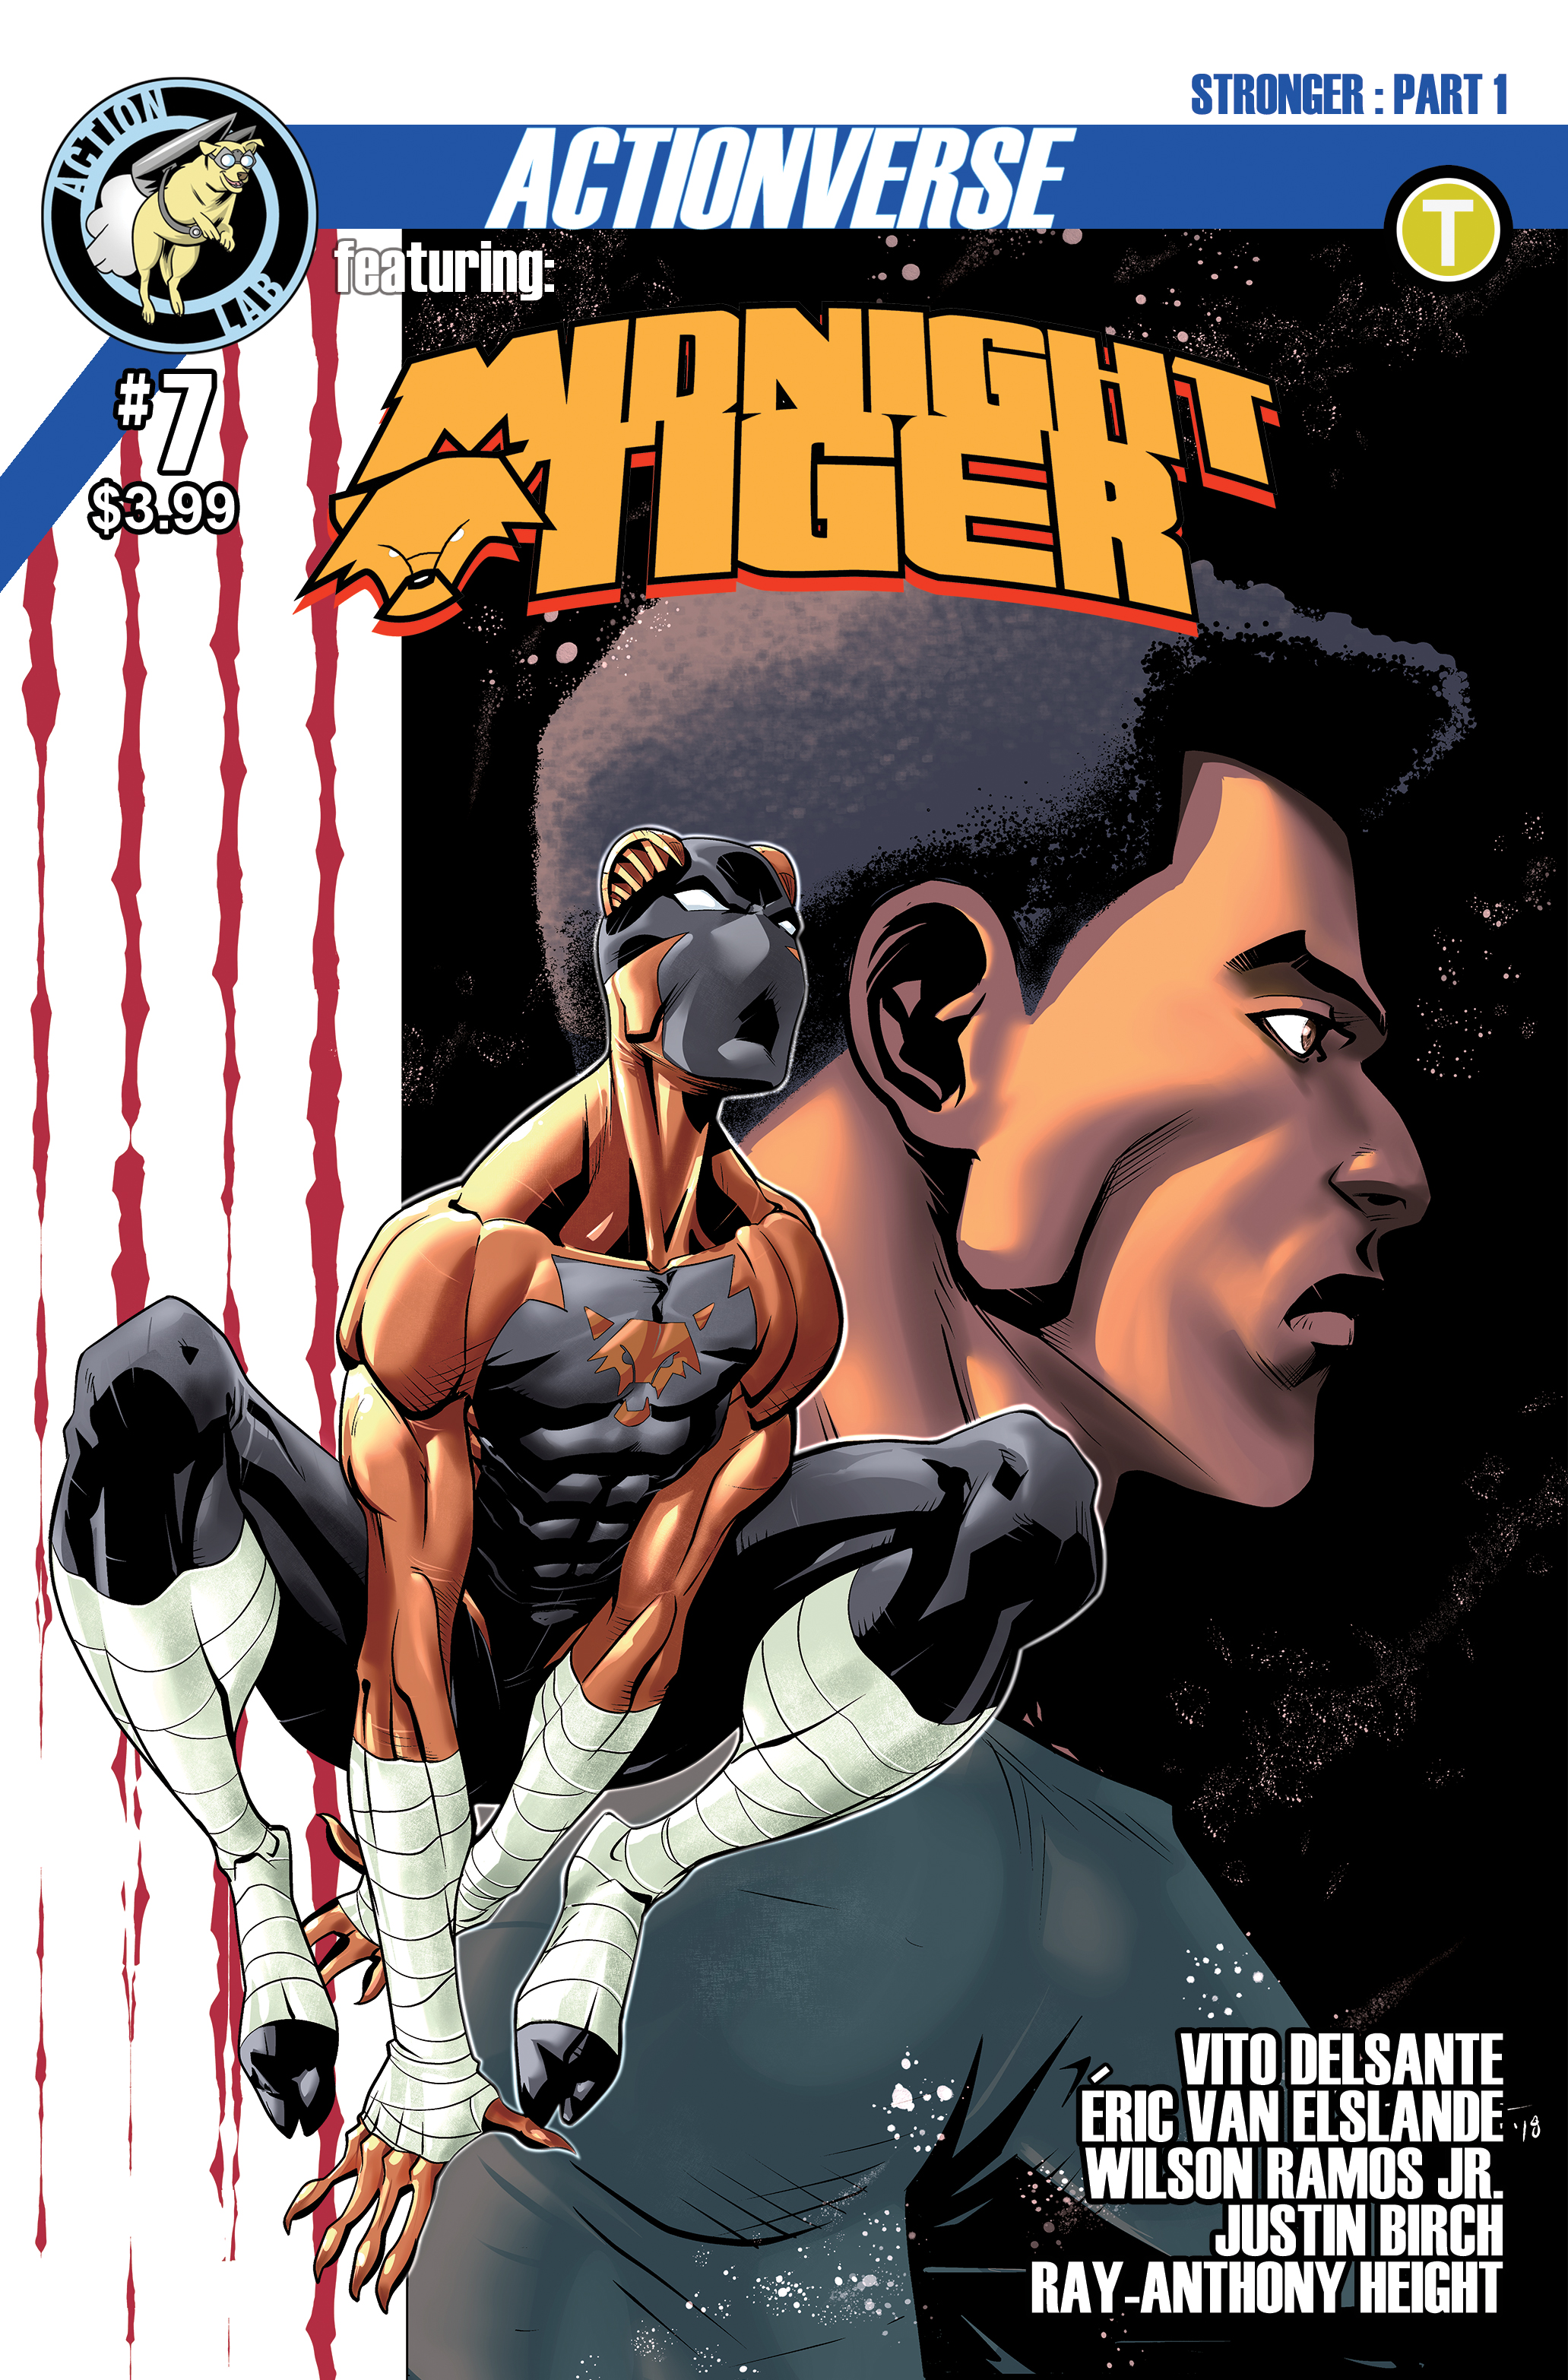 Actionverse #7 Featuring Midnight Tiger Cover B.jpg